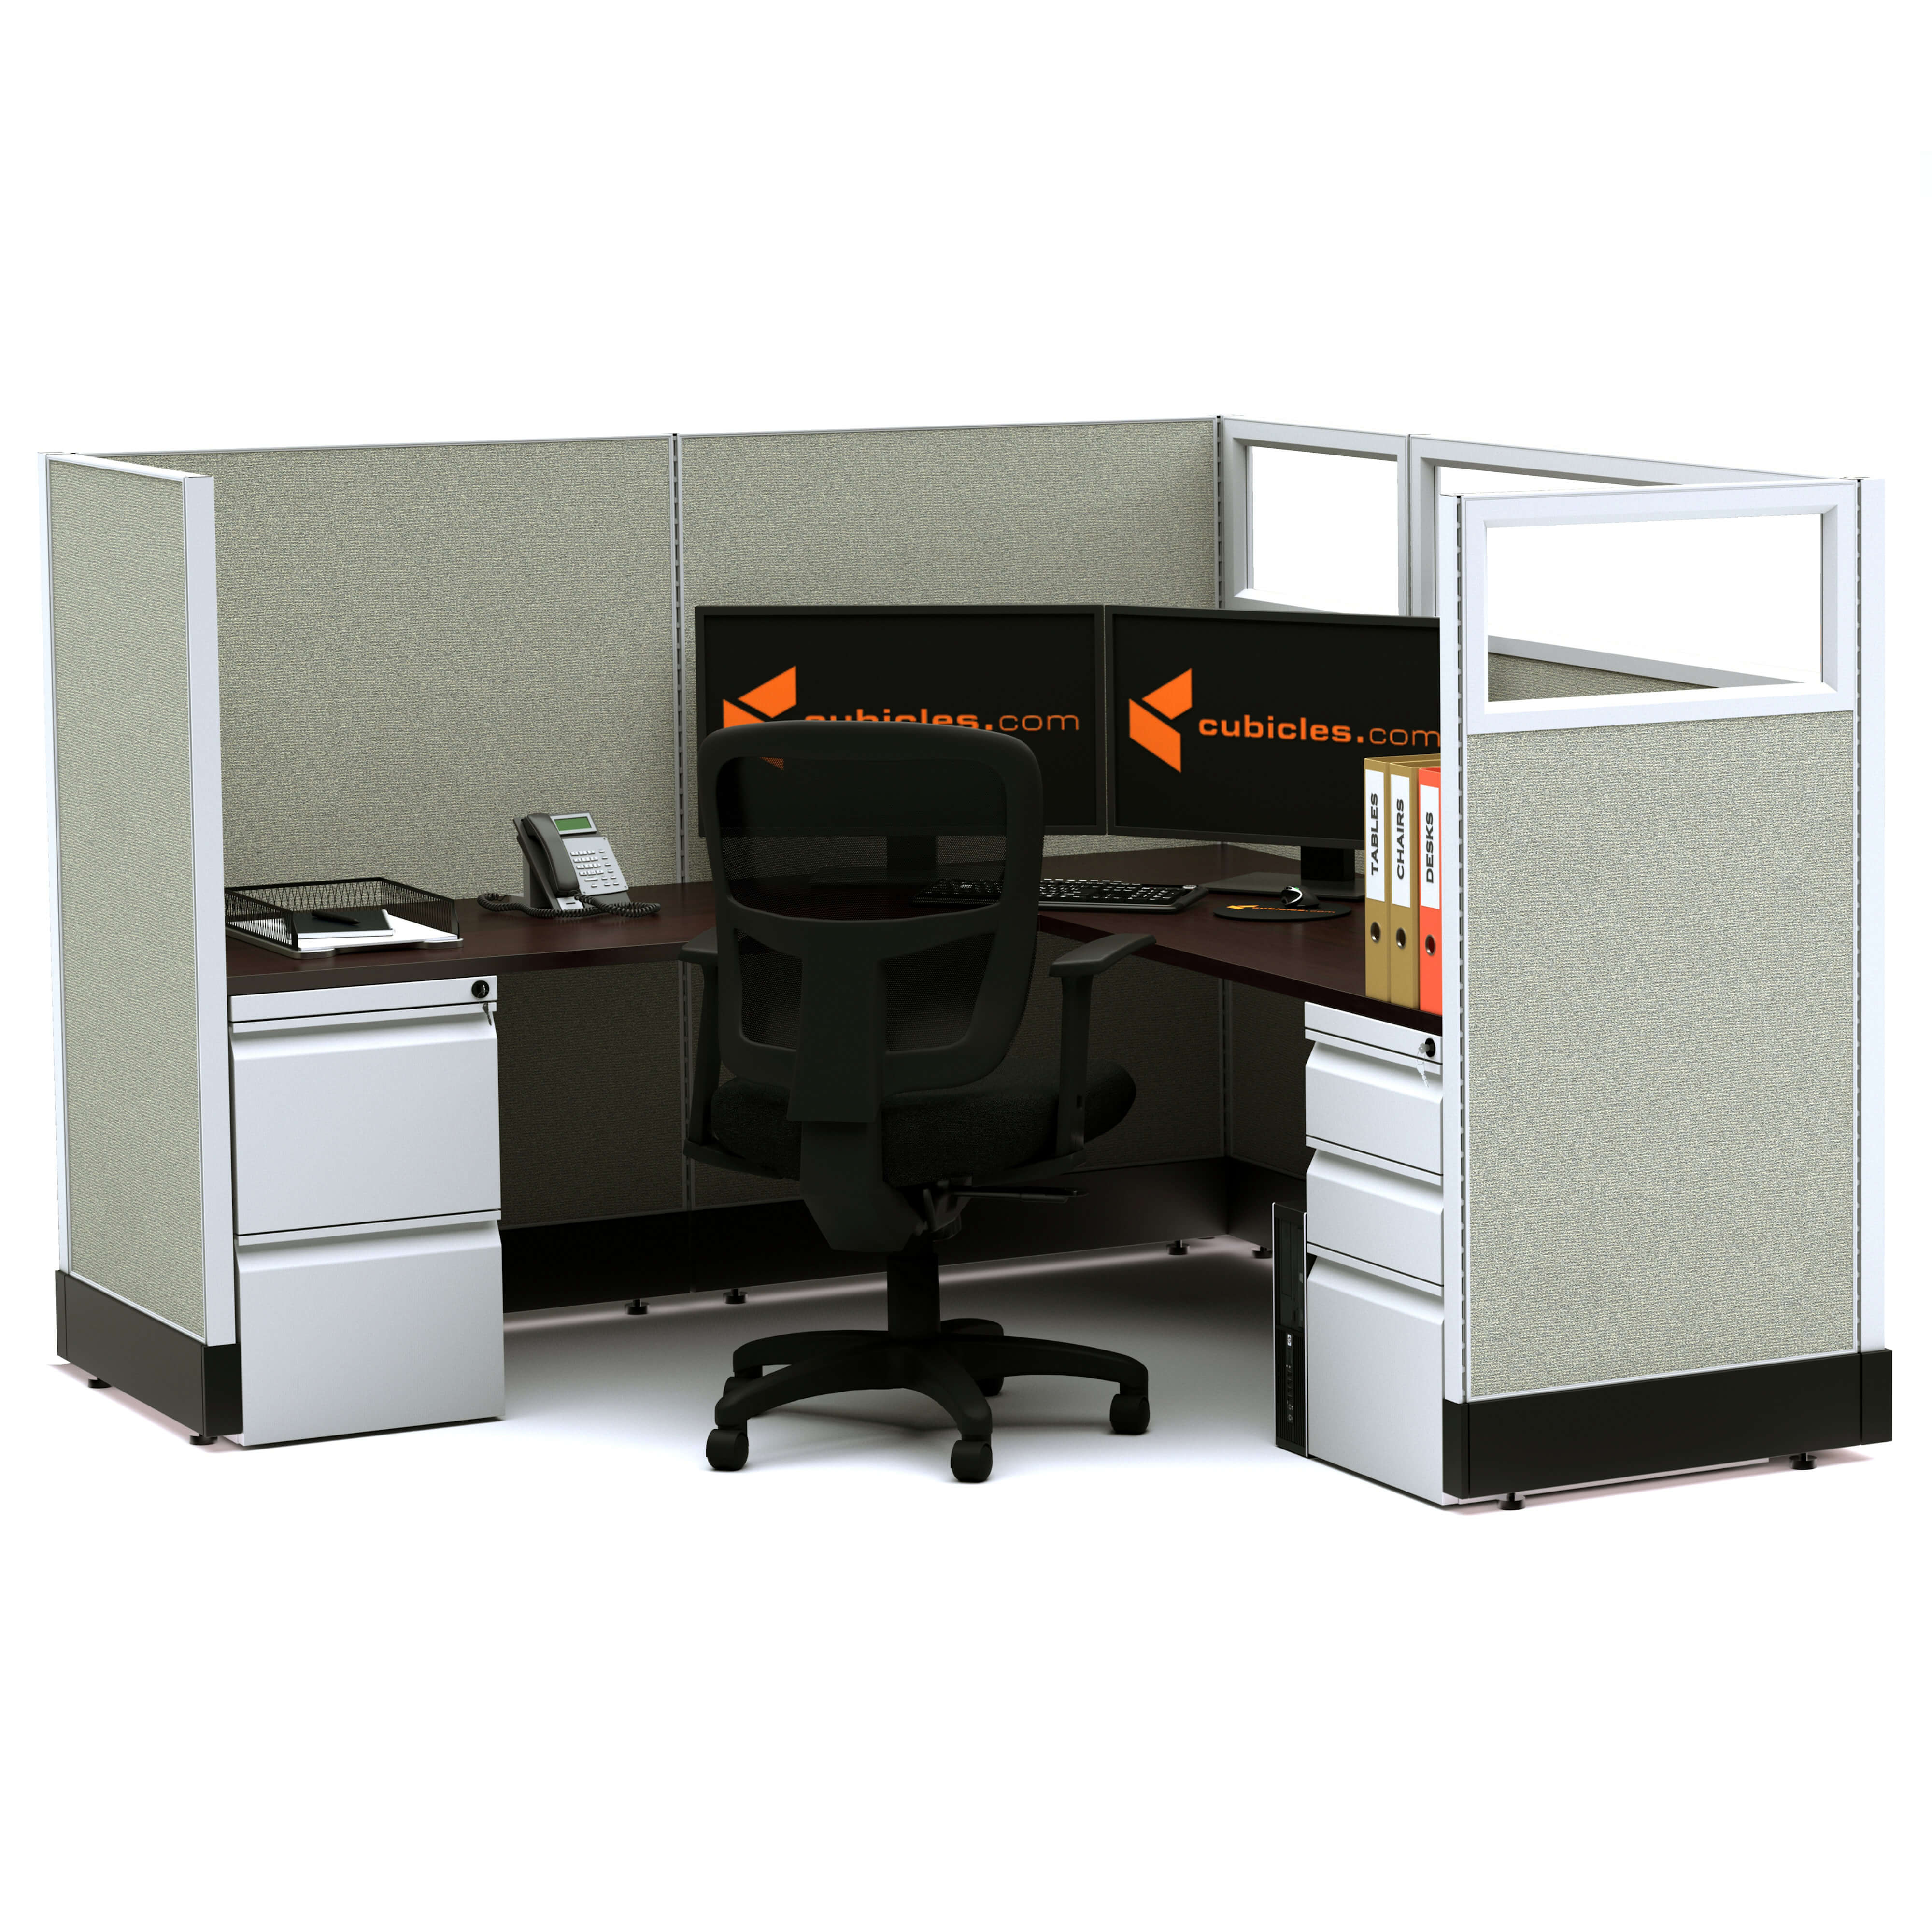 Modular office furniture partial glass office cubicles 53h single non powered